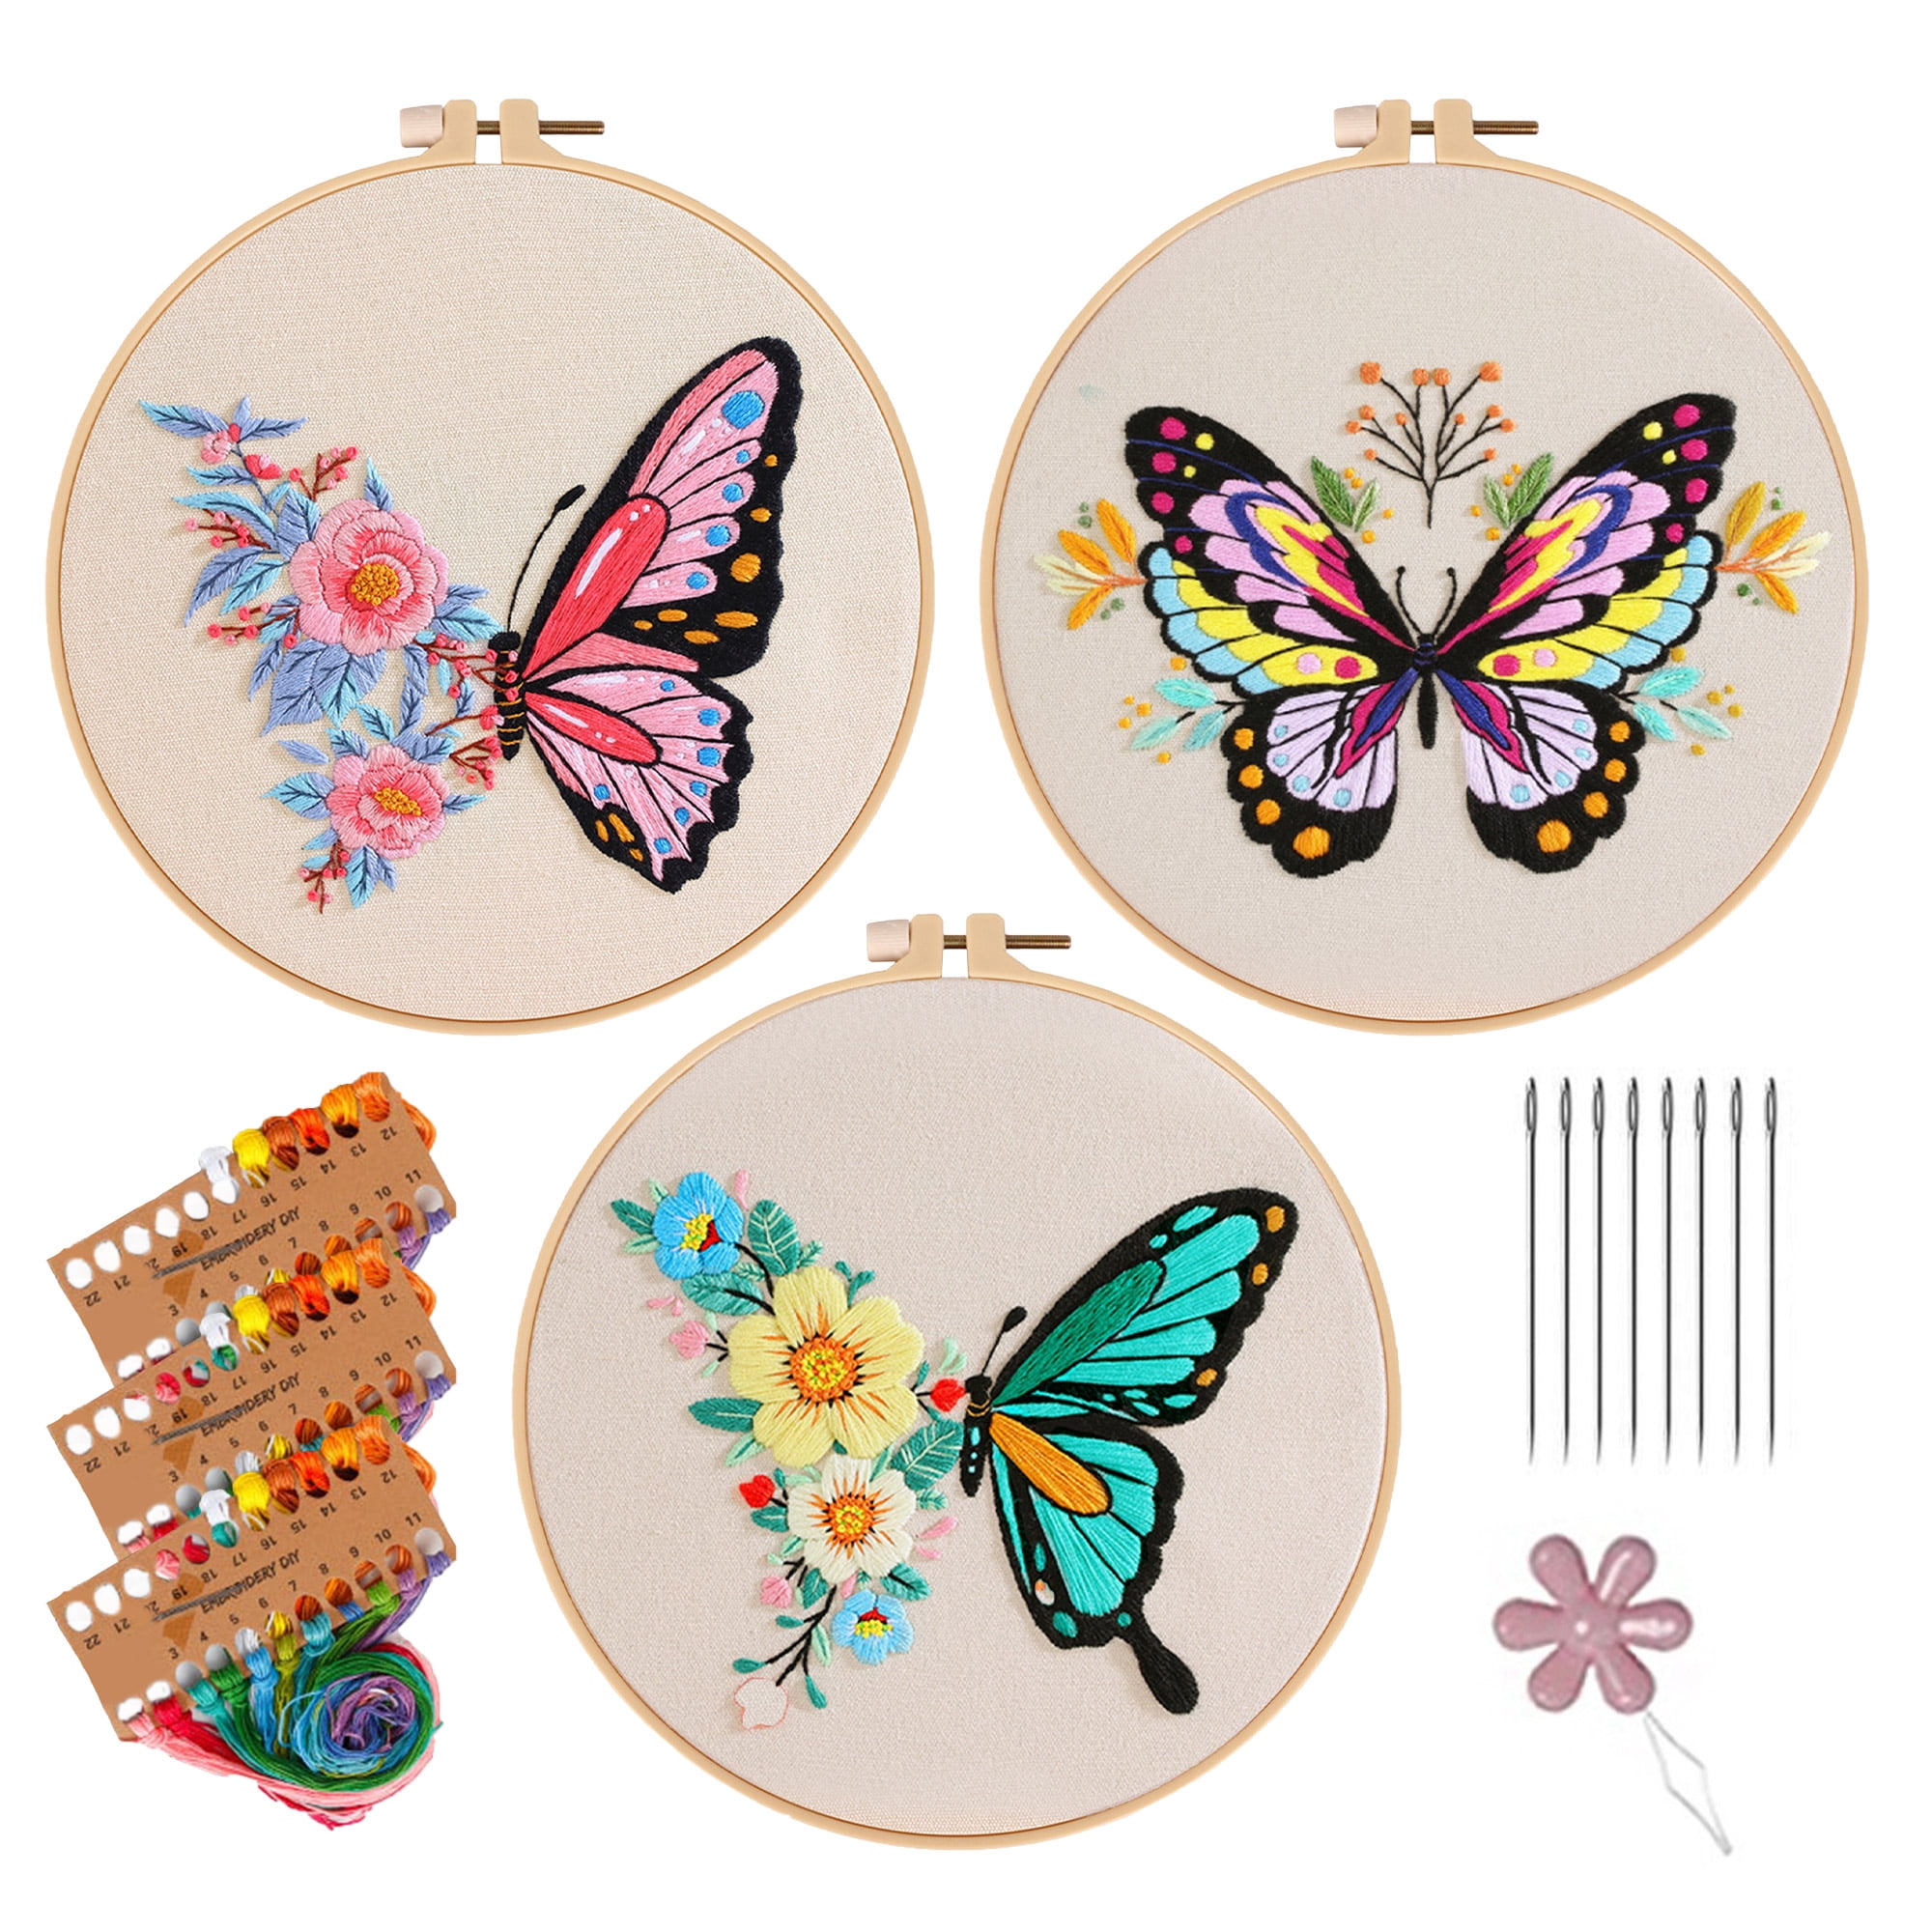  7Pcs Butterfly Stamped Cross Stitch Kits for Adults, Beautiful  Butterfly Counted Pattern Needlepoint Kits Crafts Dimensions Cross-Stitch  Stamped Kits Embroidery Kits Arts Craft Kits for Wall Art Gift